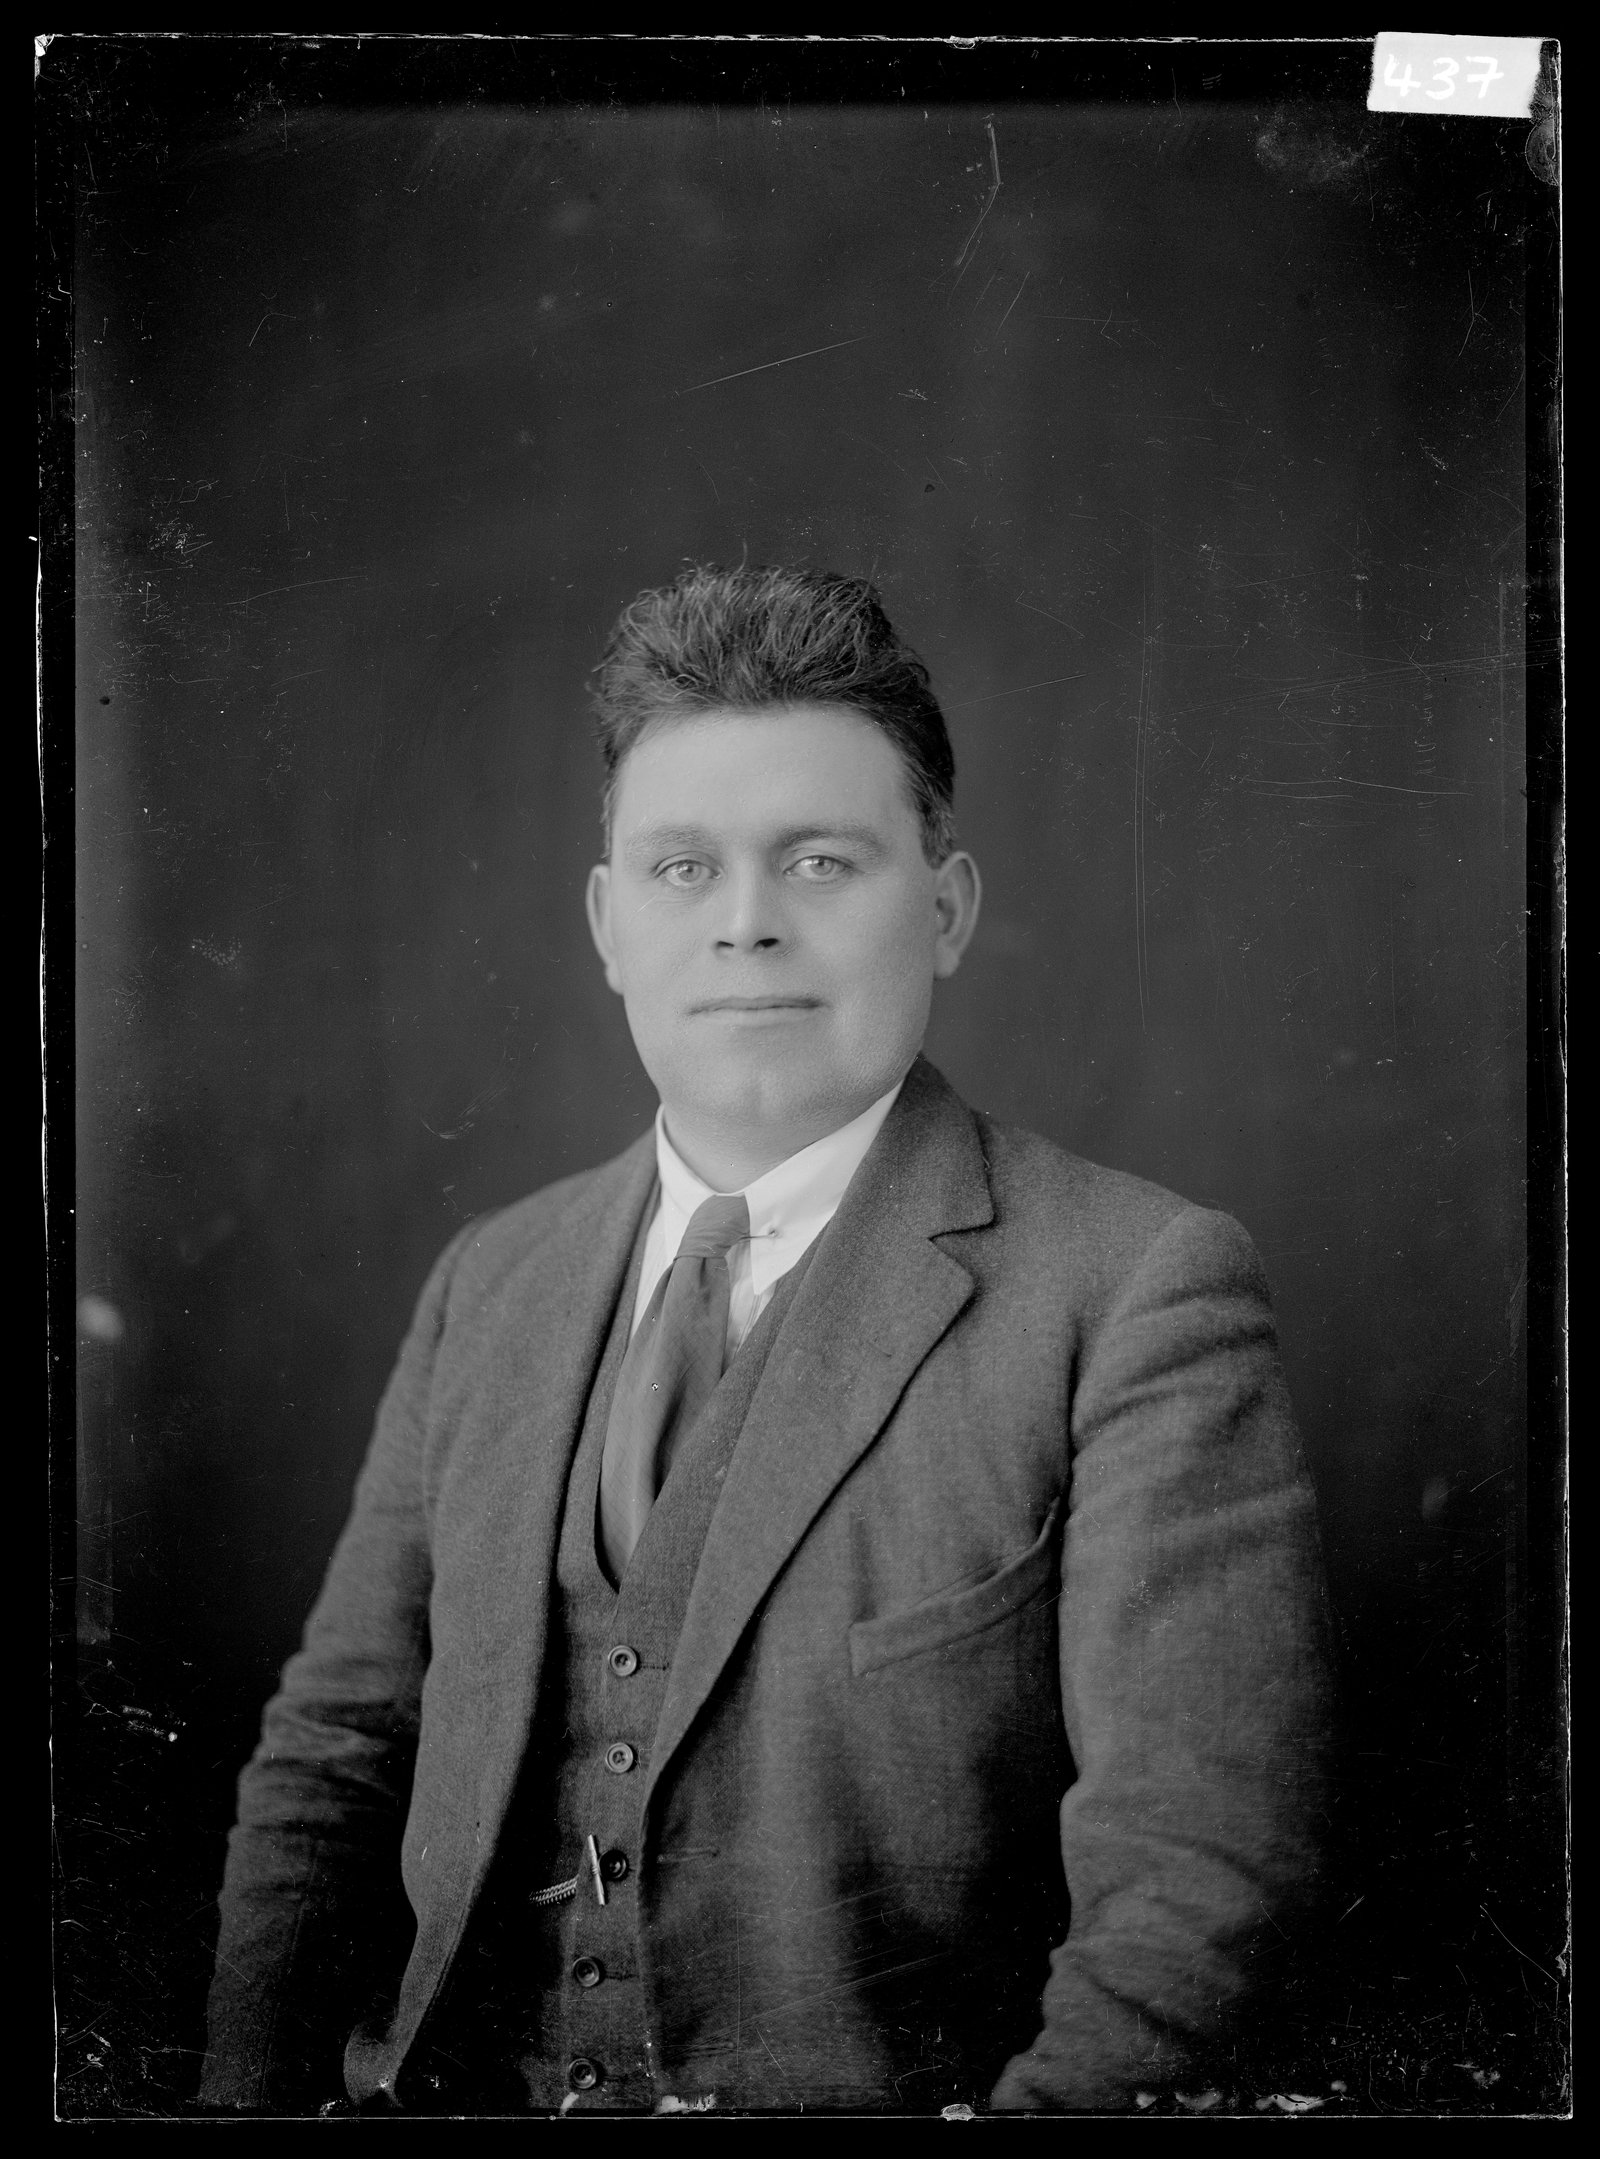 Image - Tipperary IRA officer Dan Breen: 'I would never have handled a gun or fired a shot... to obtain this Treaty'. Credit: National Library of Ireland